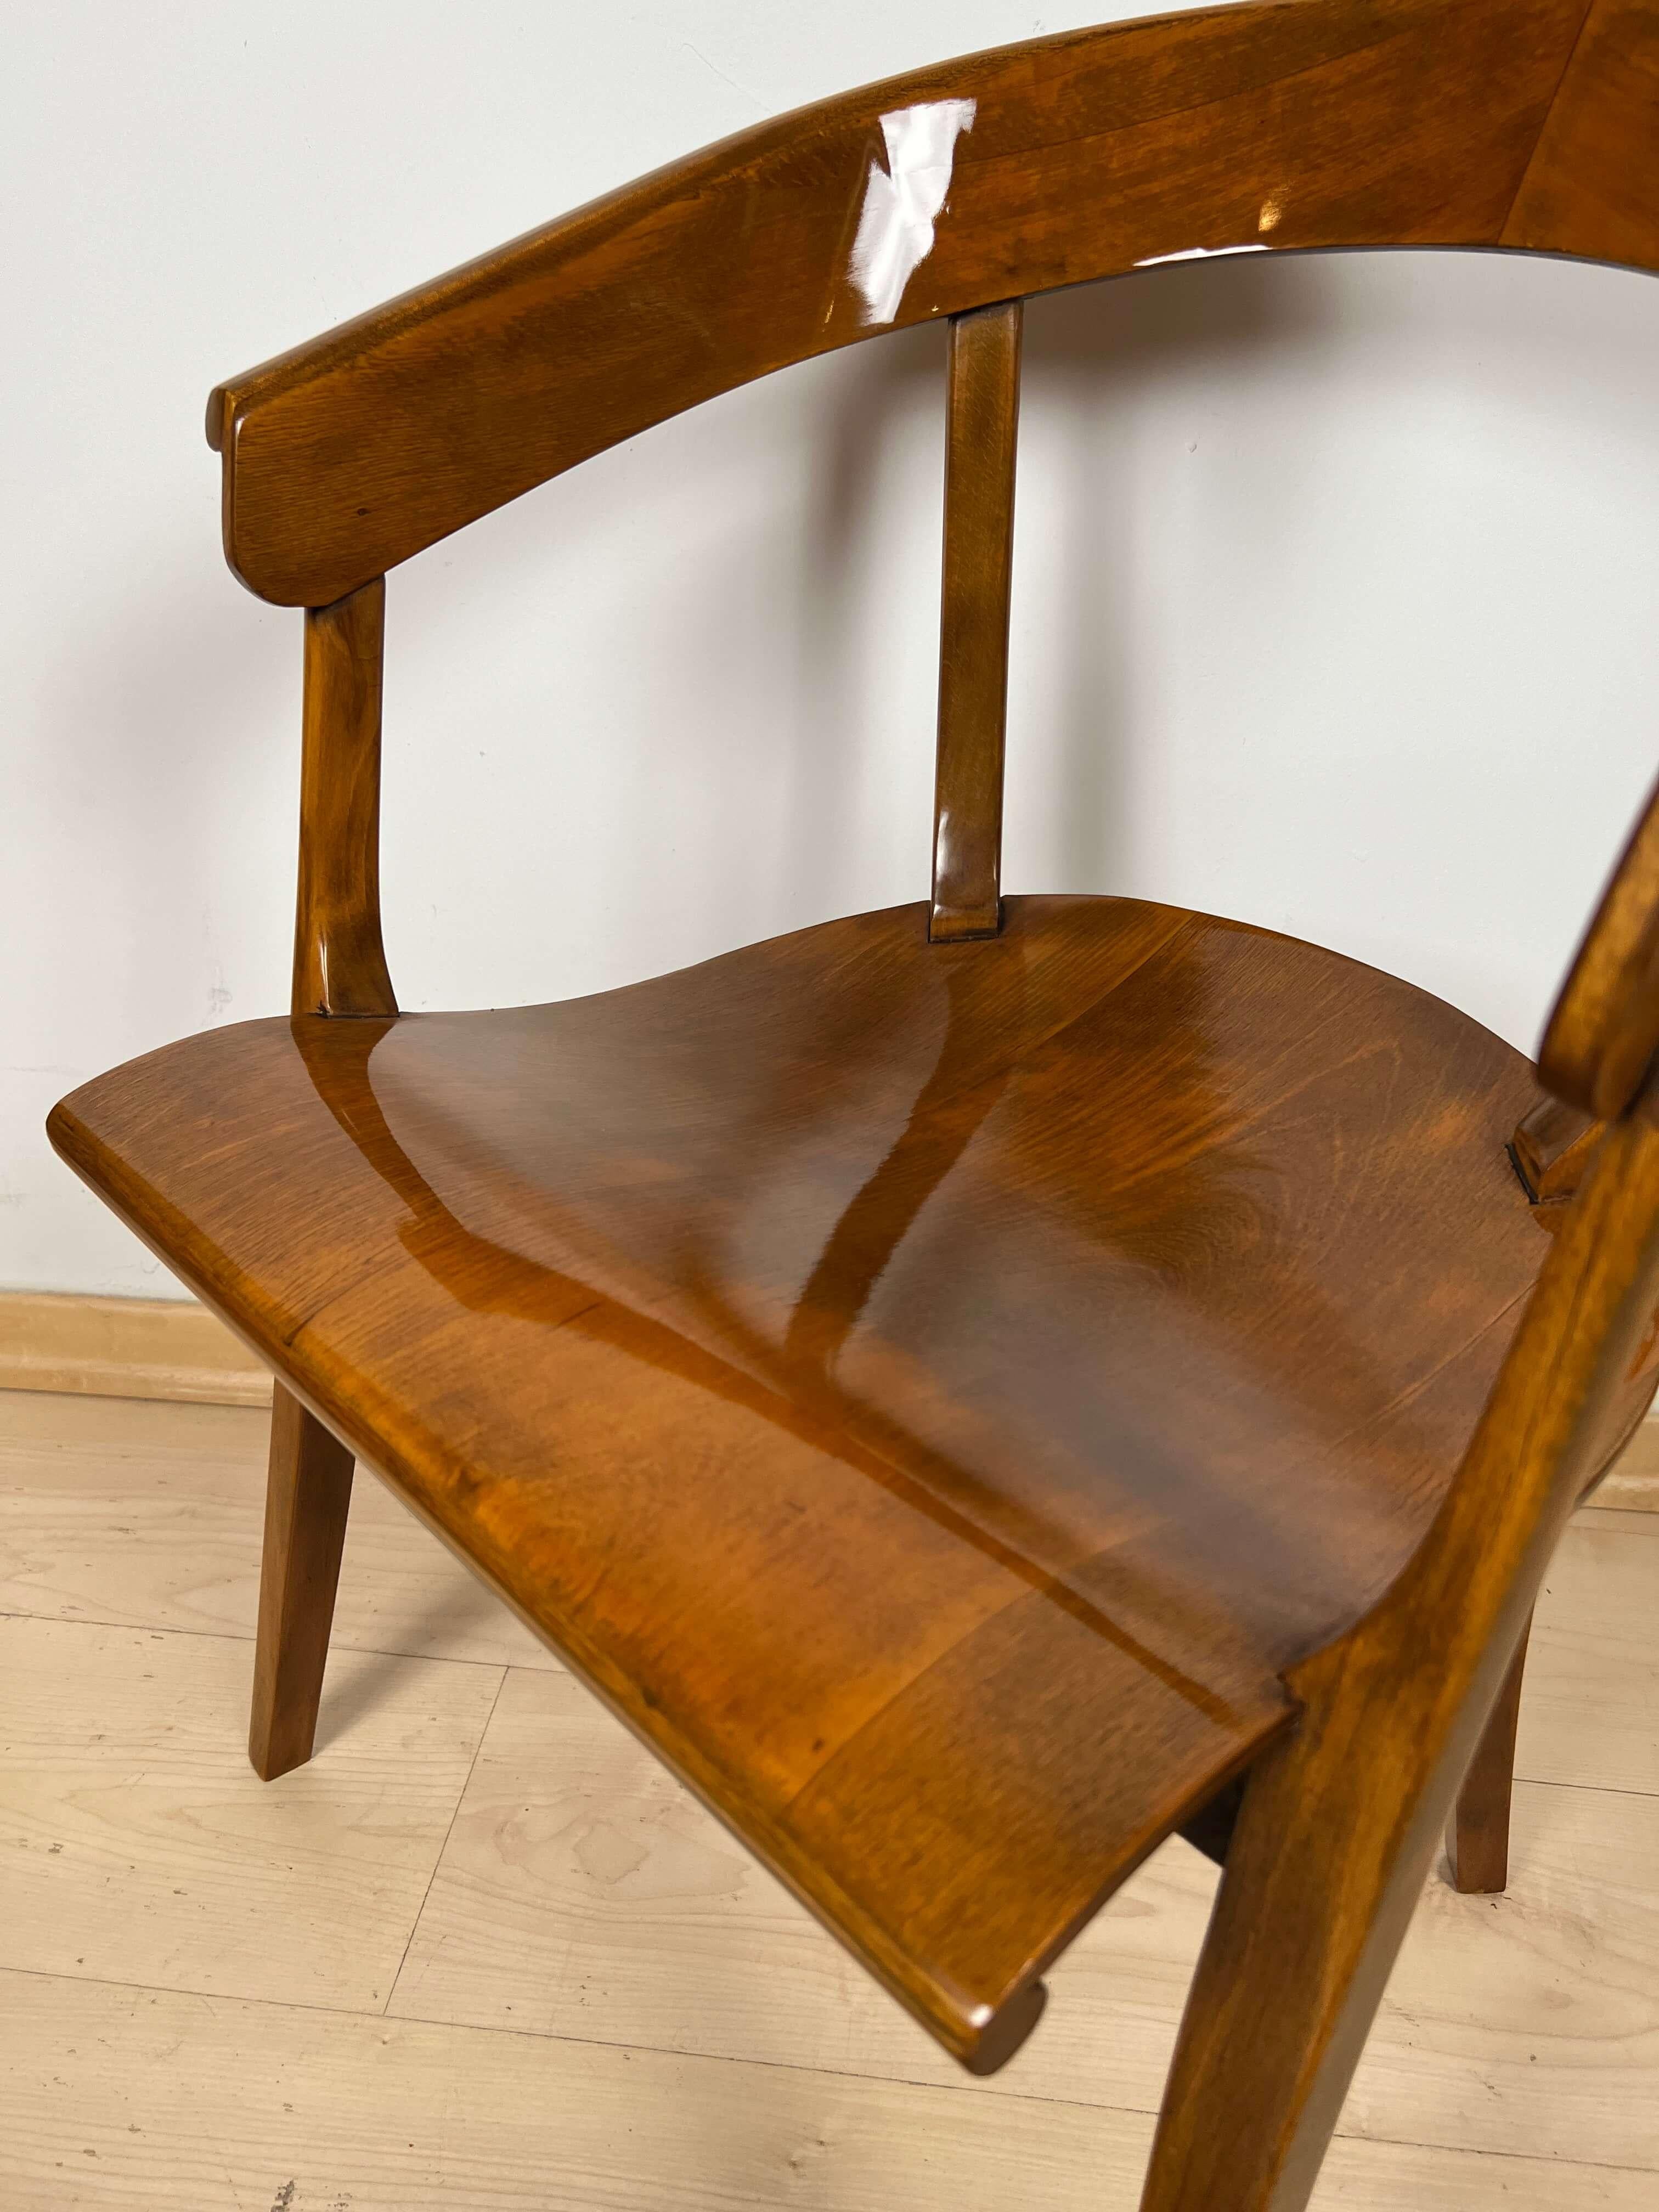 Bauhaus Armchair by Rockhausen, Polished Wood, Germany, 1928 For Sale 6